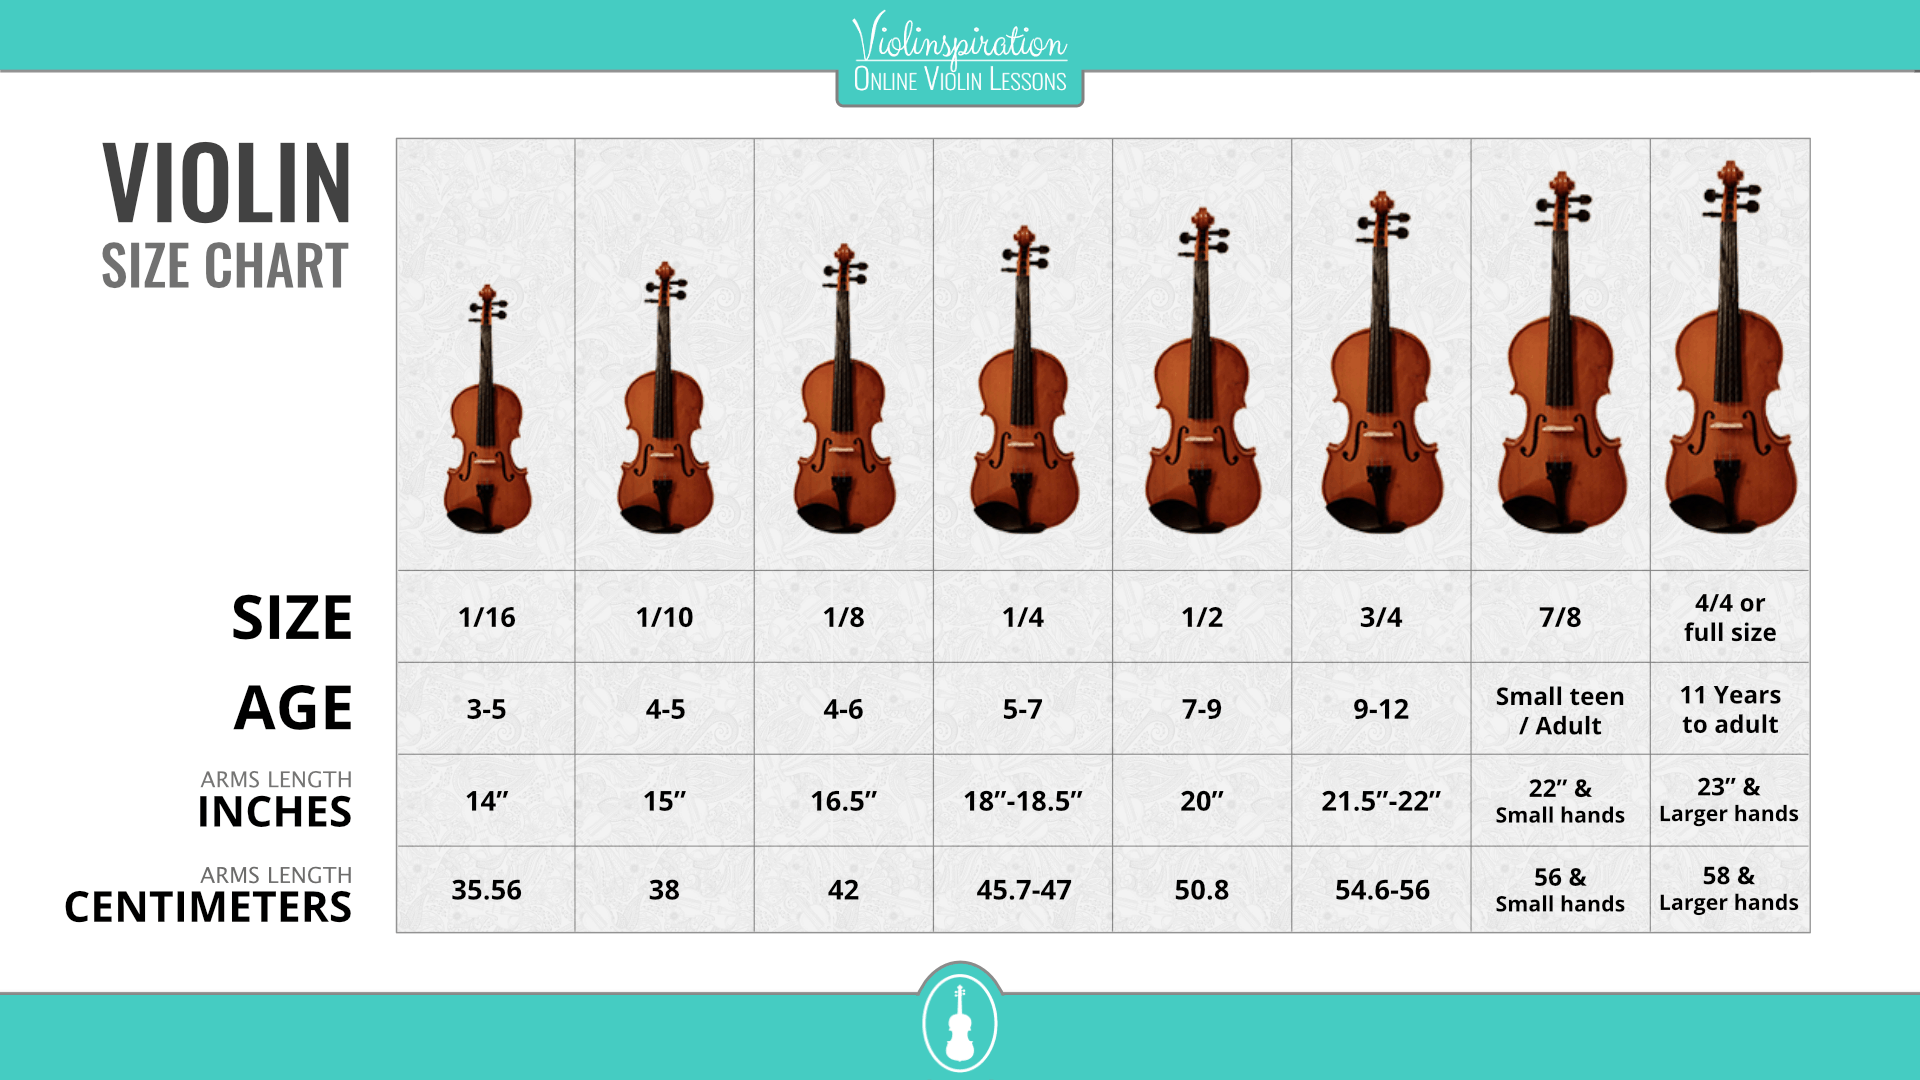 violin size chart : dimensions by arm length and age